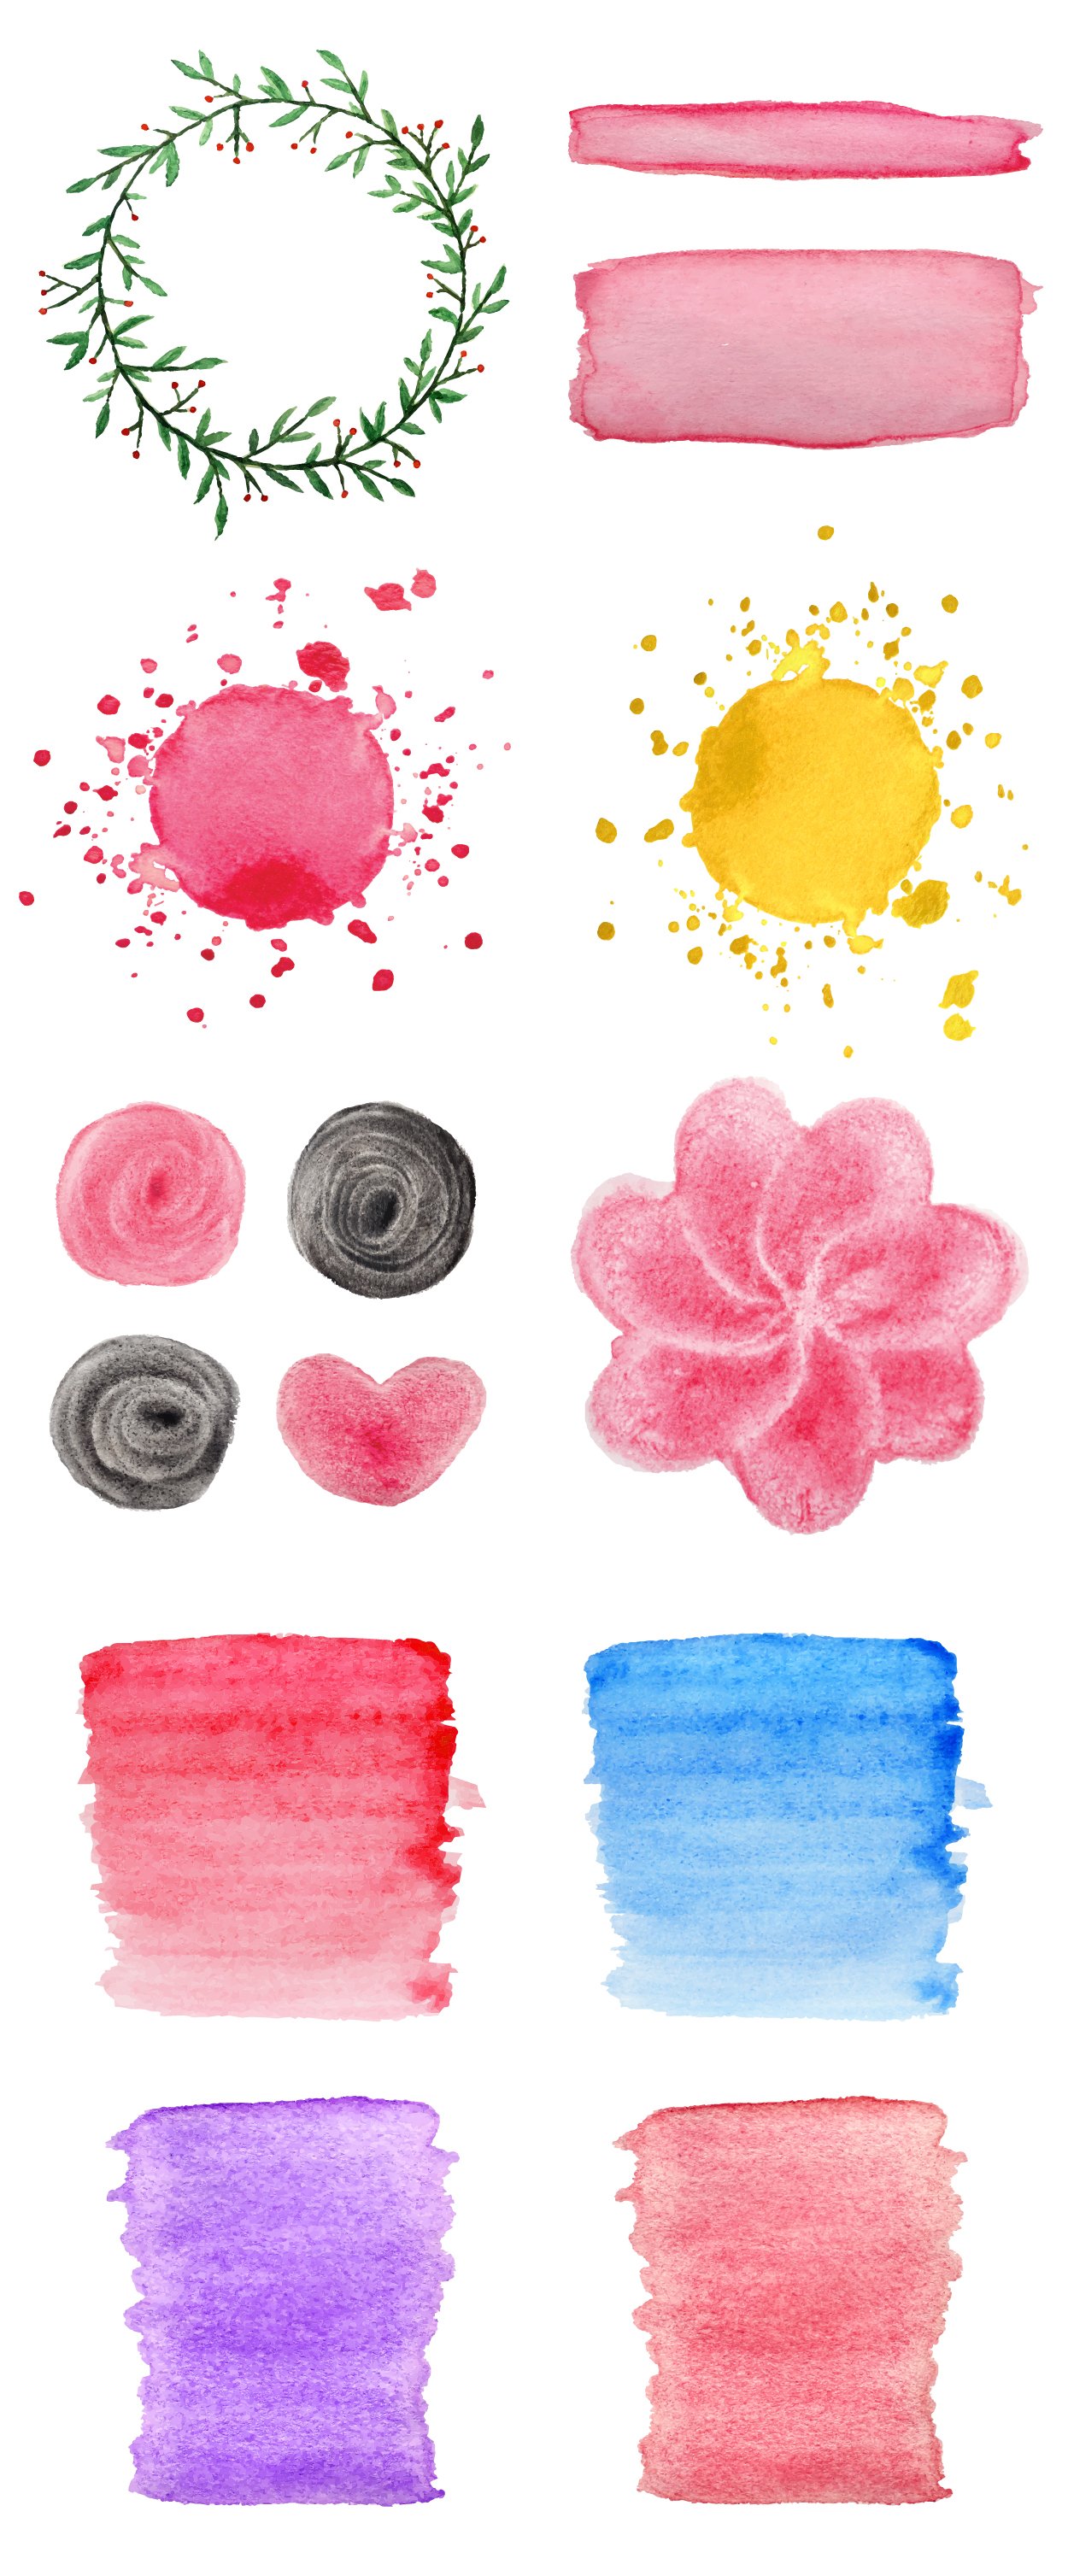 Set of watercolor brushes with different colors.